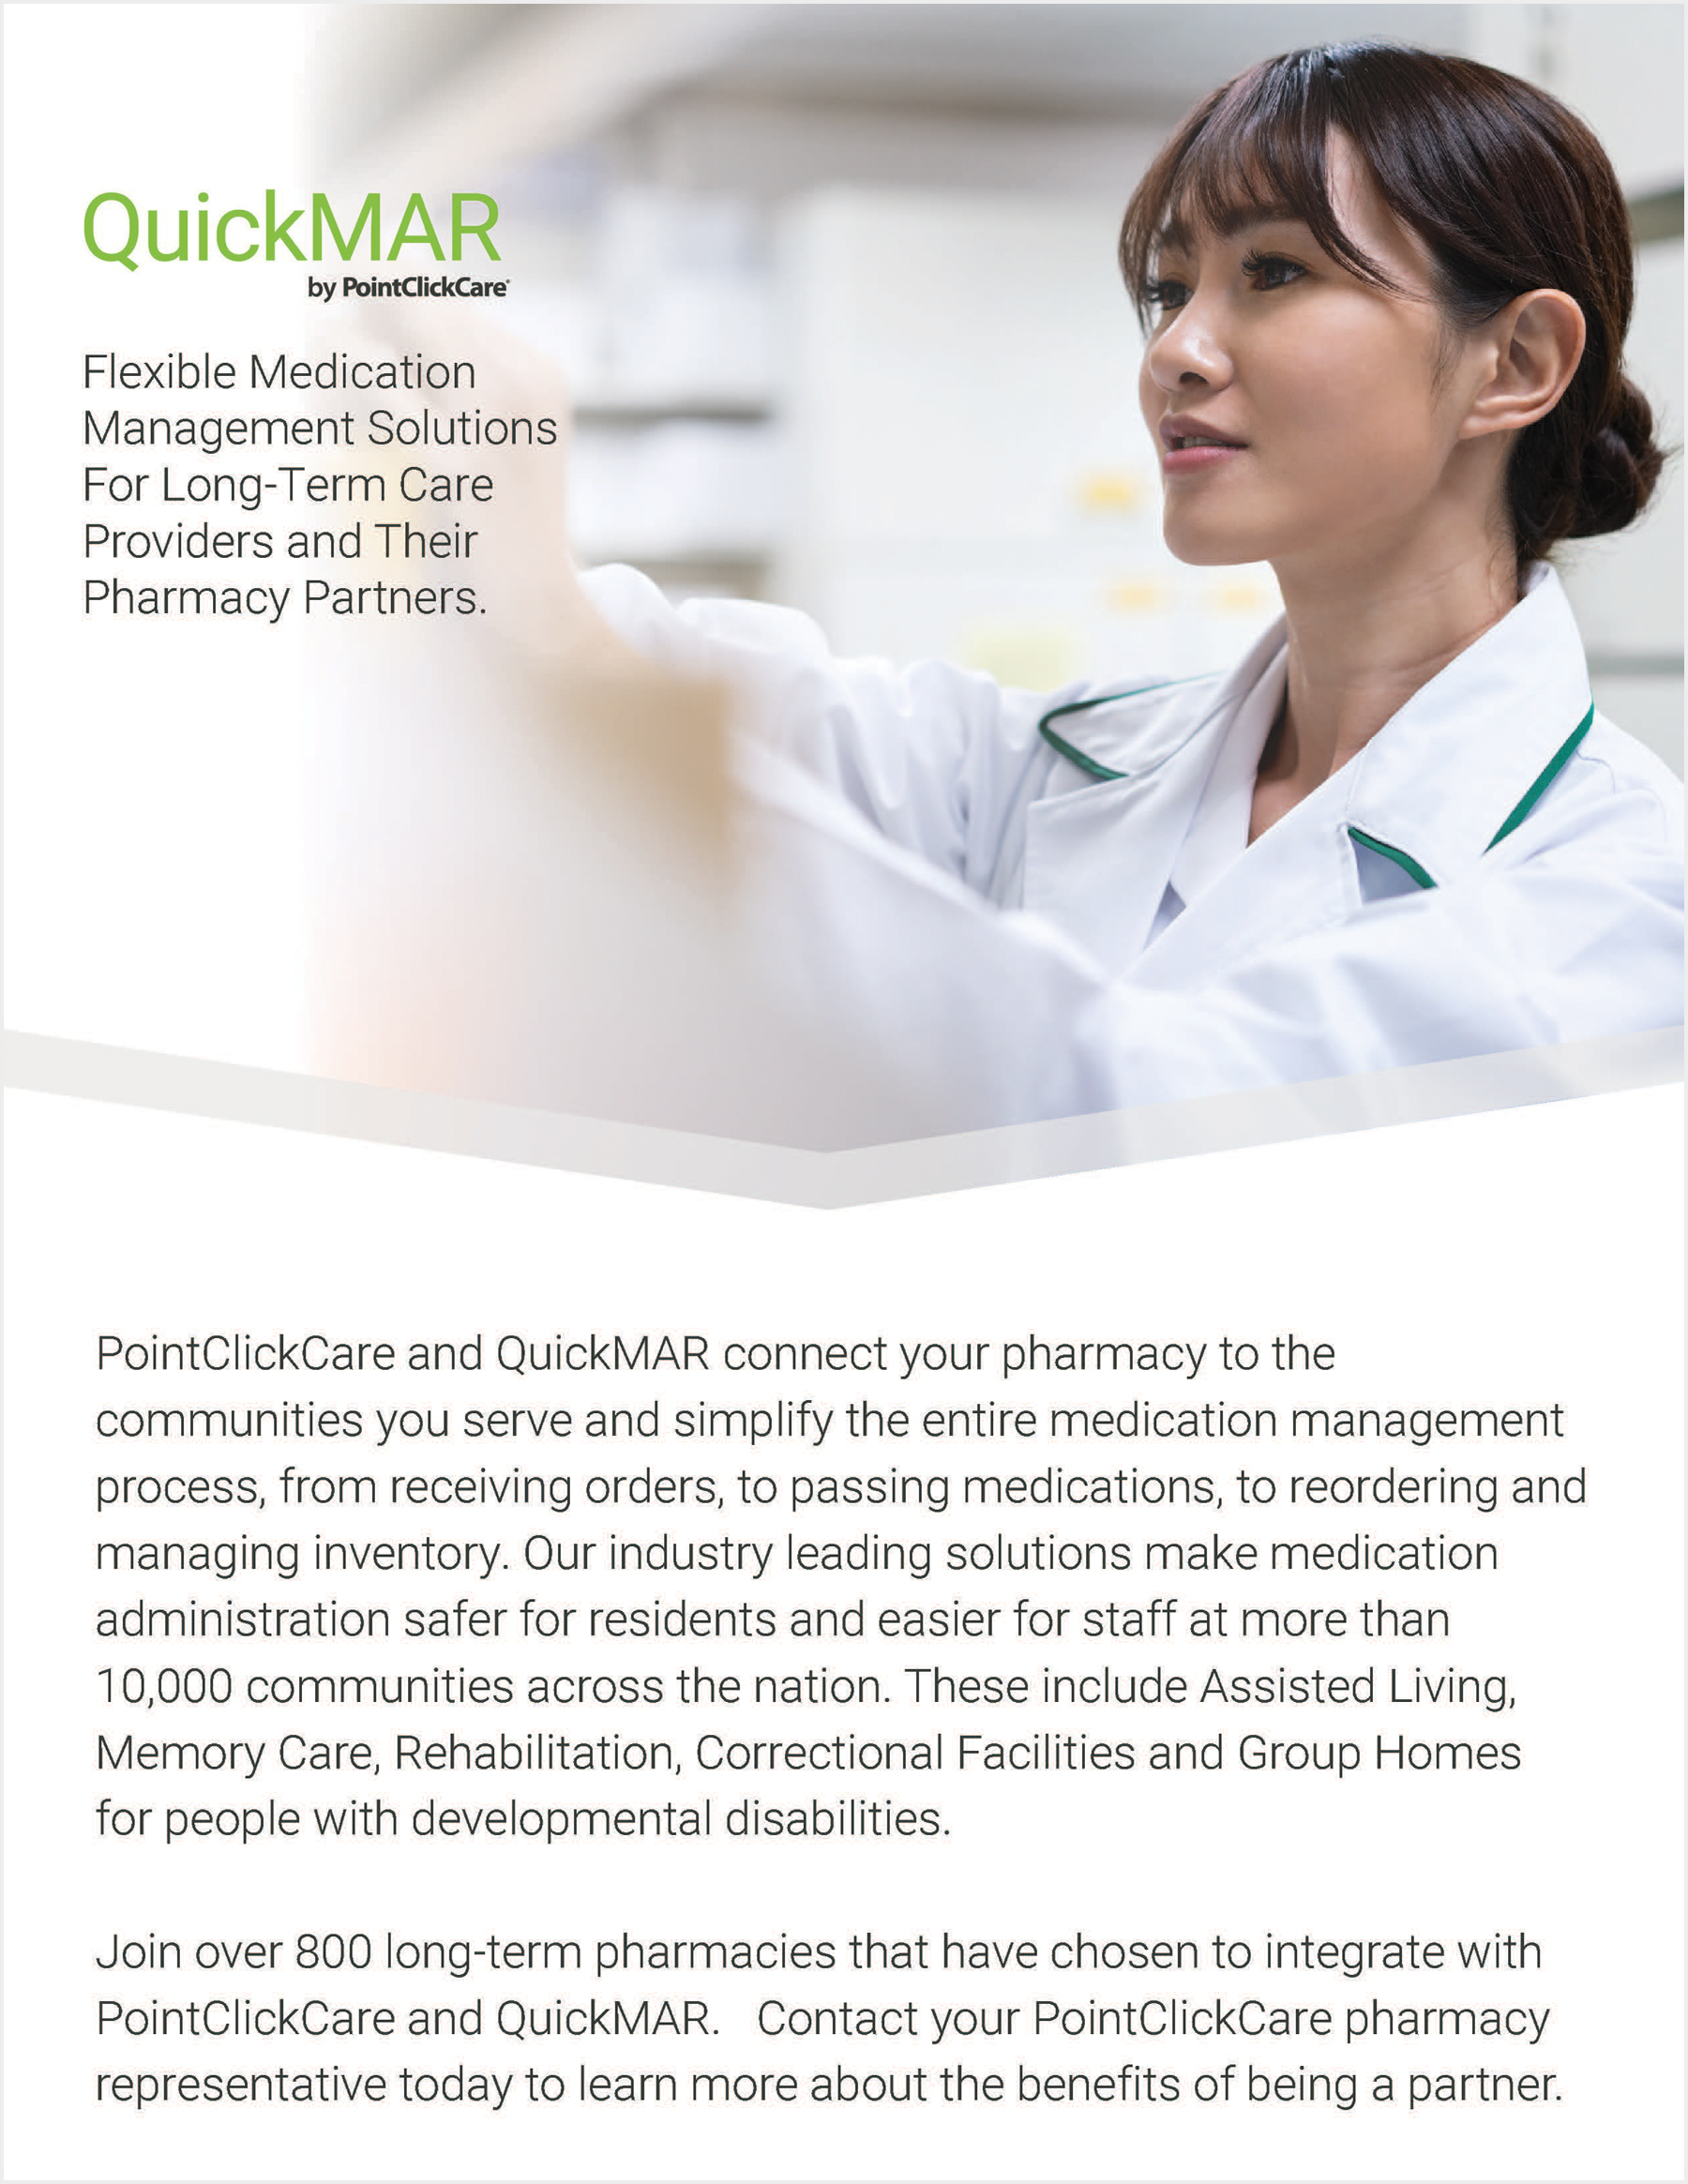 QuickMAR Pharmacy brochure medication management-long-term care providers pharmacy partners smiling worker